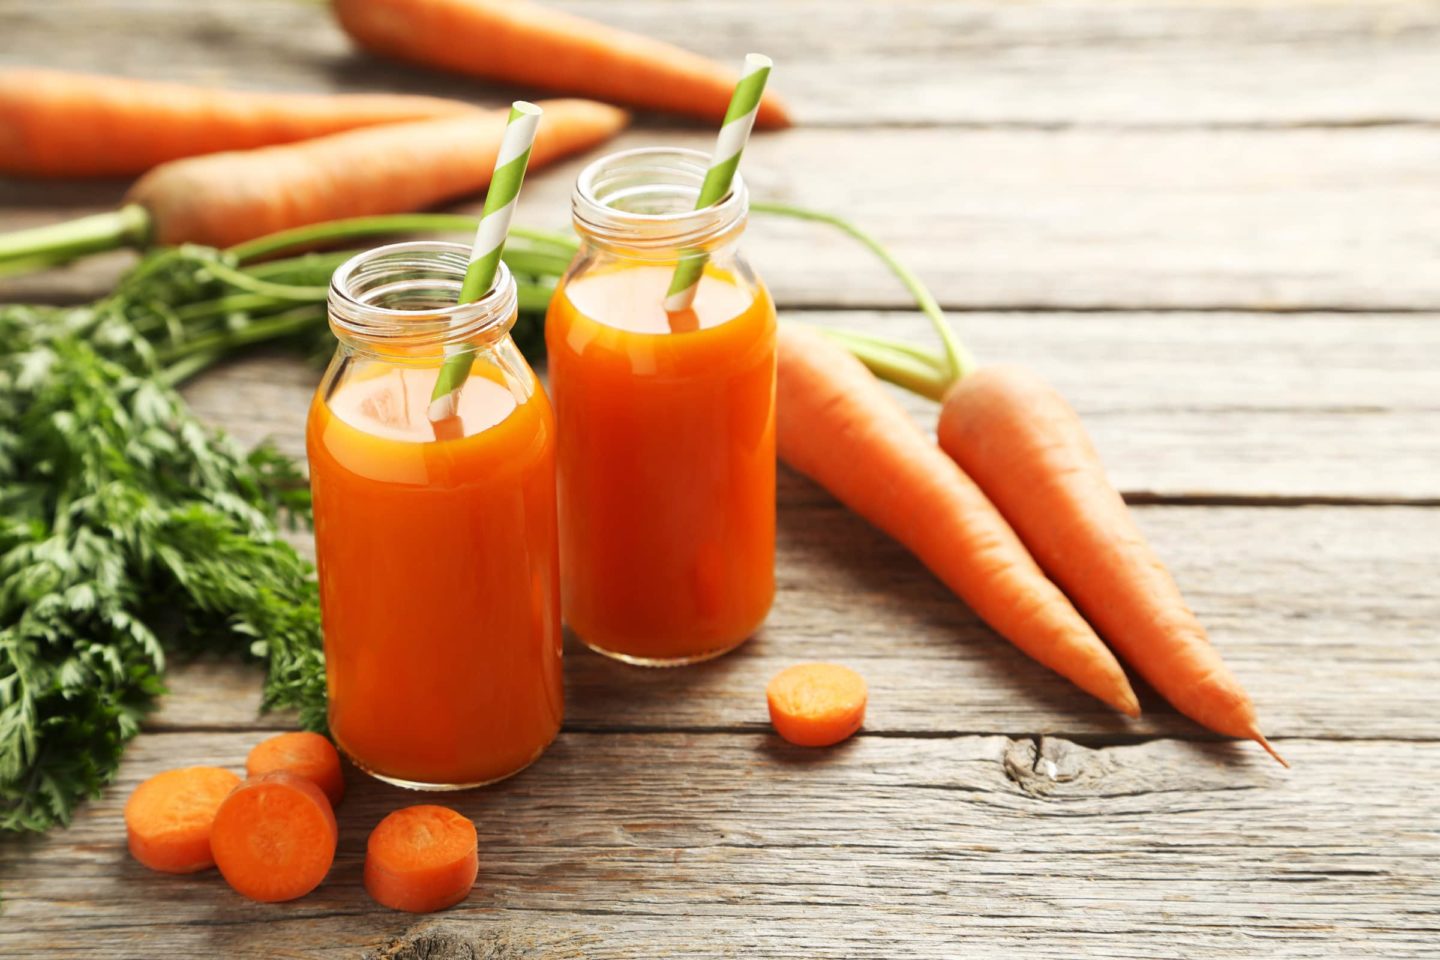 Carrot Juice With Fresh Carrots